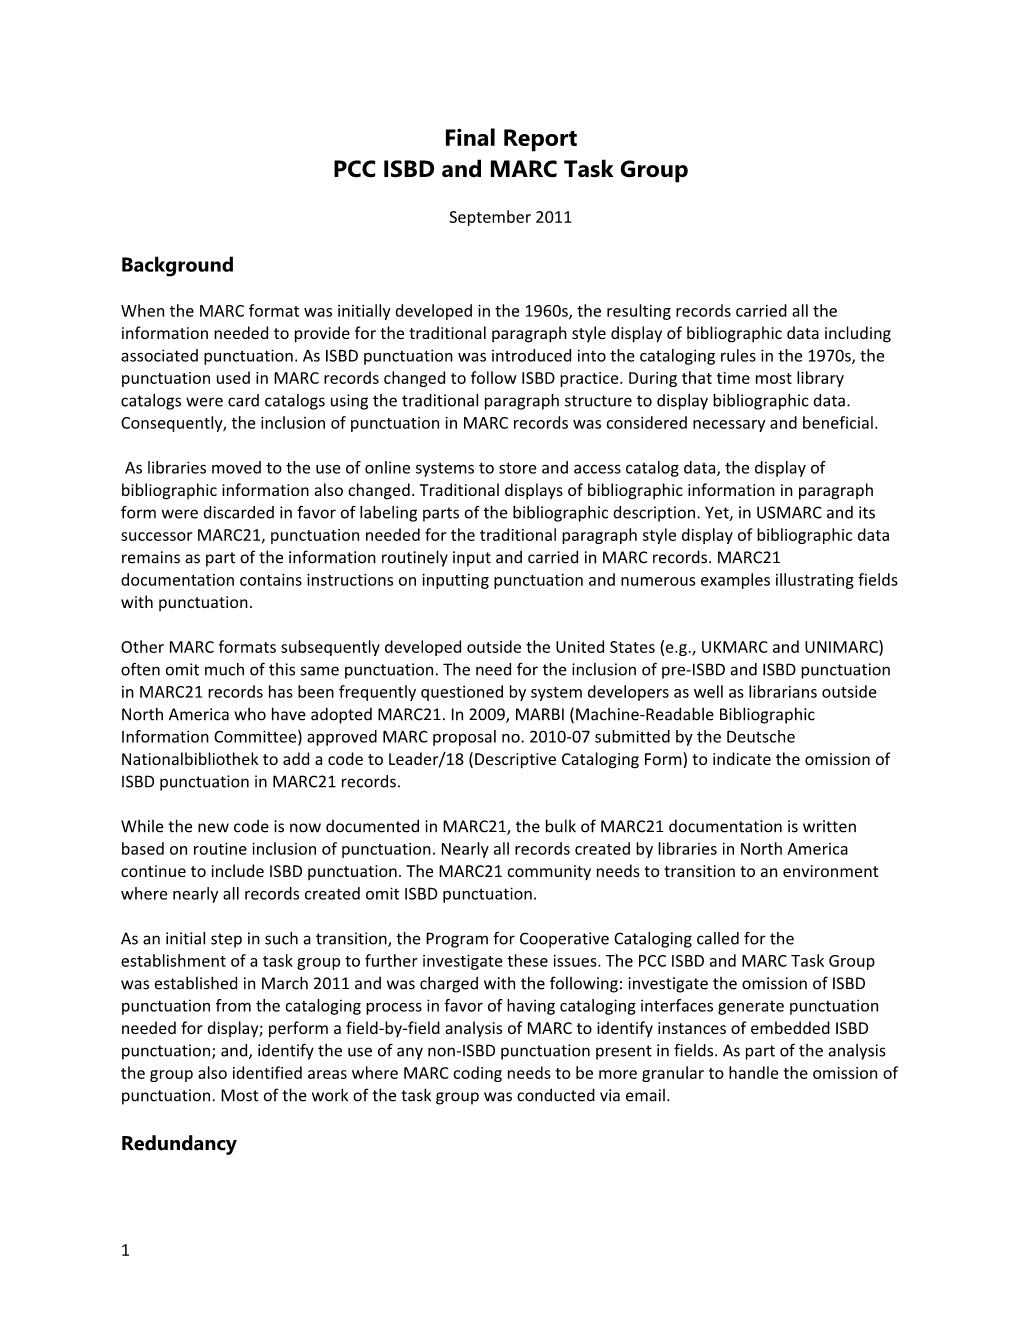 Final Report PCC ISBD and MARC Task Group